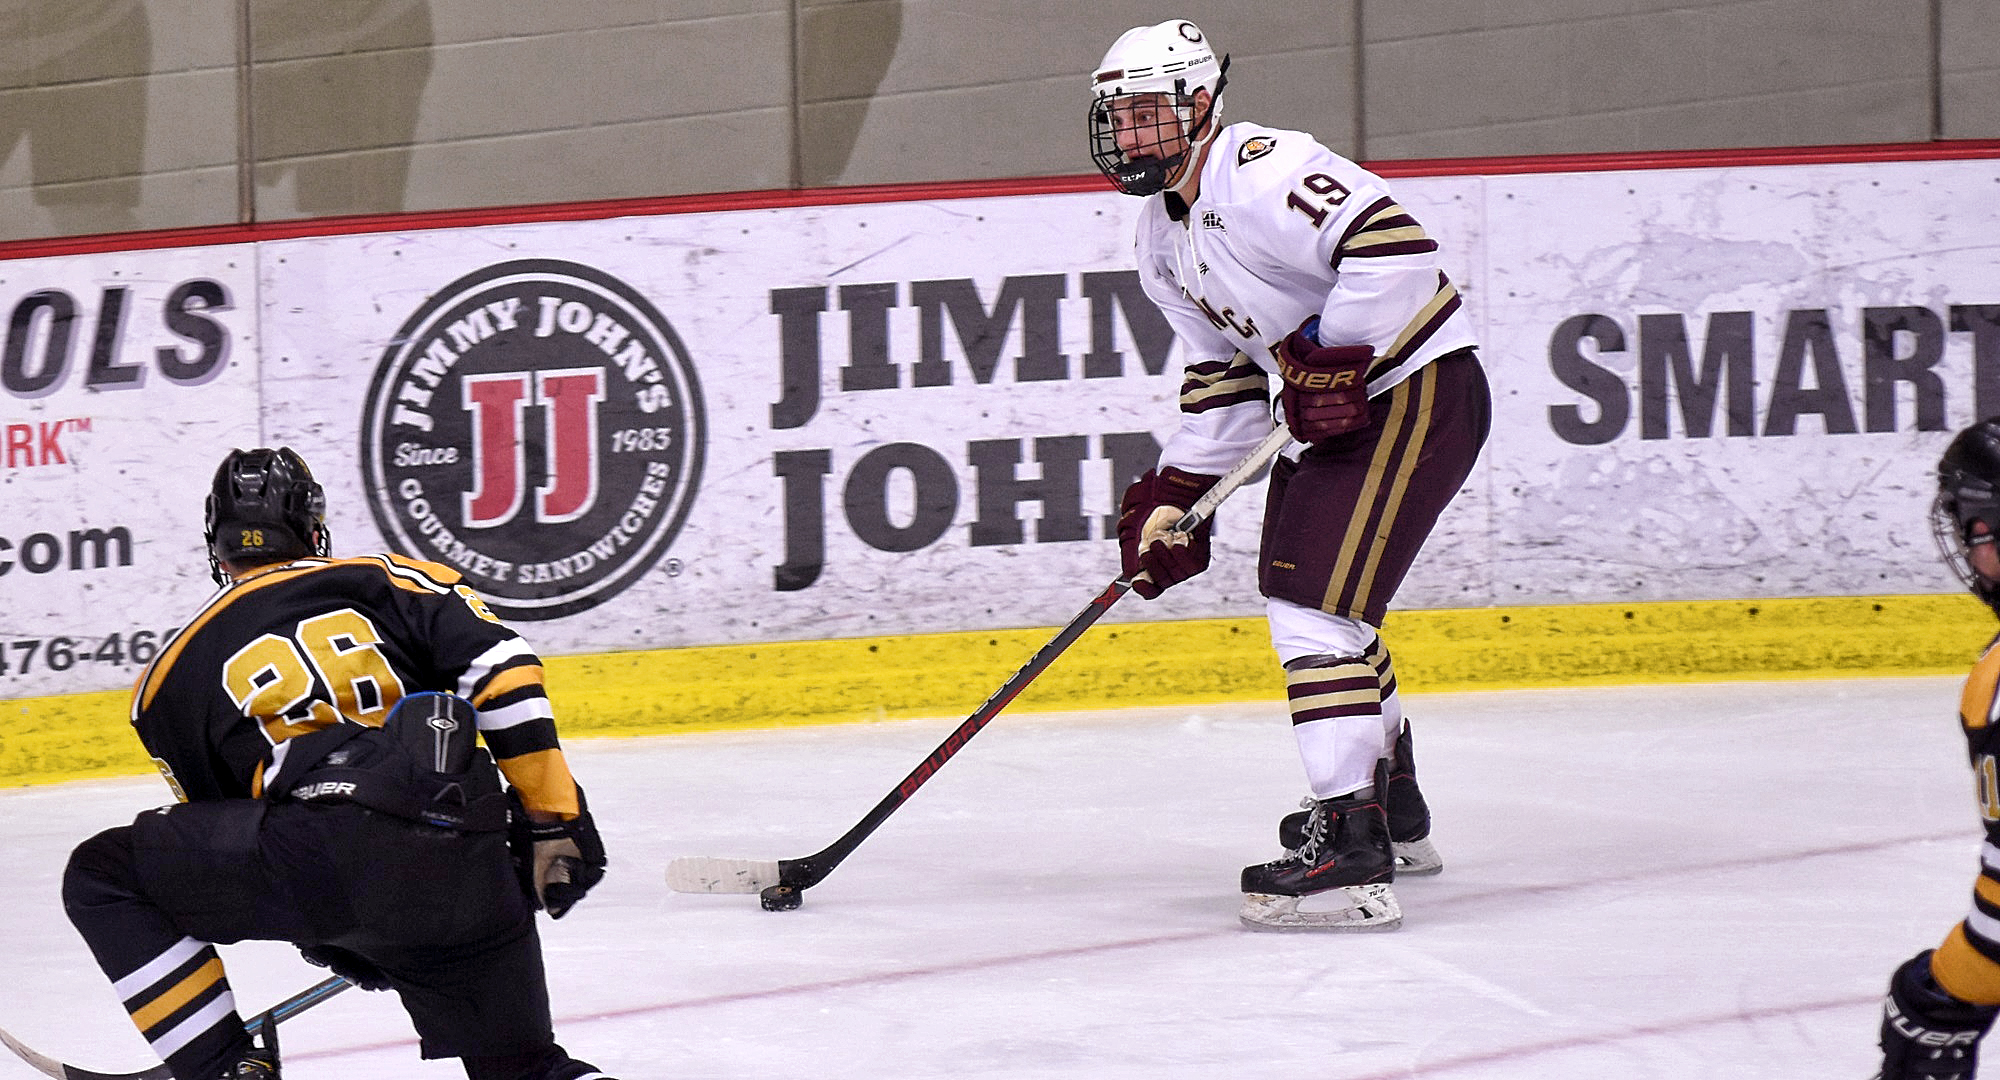 Sophomore Tyler Bossert looks to move the puck on the power play in the second period of the Cobbers' 5-1 win over St. Olaf.